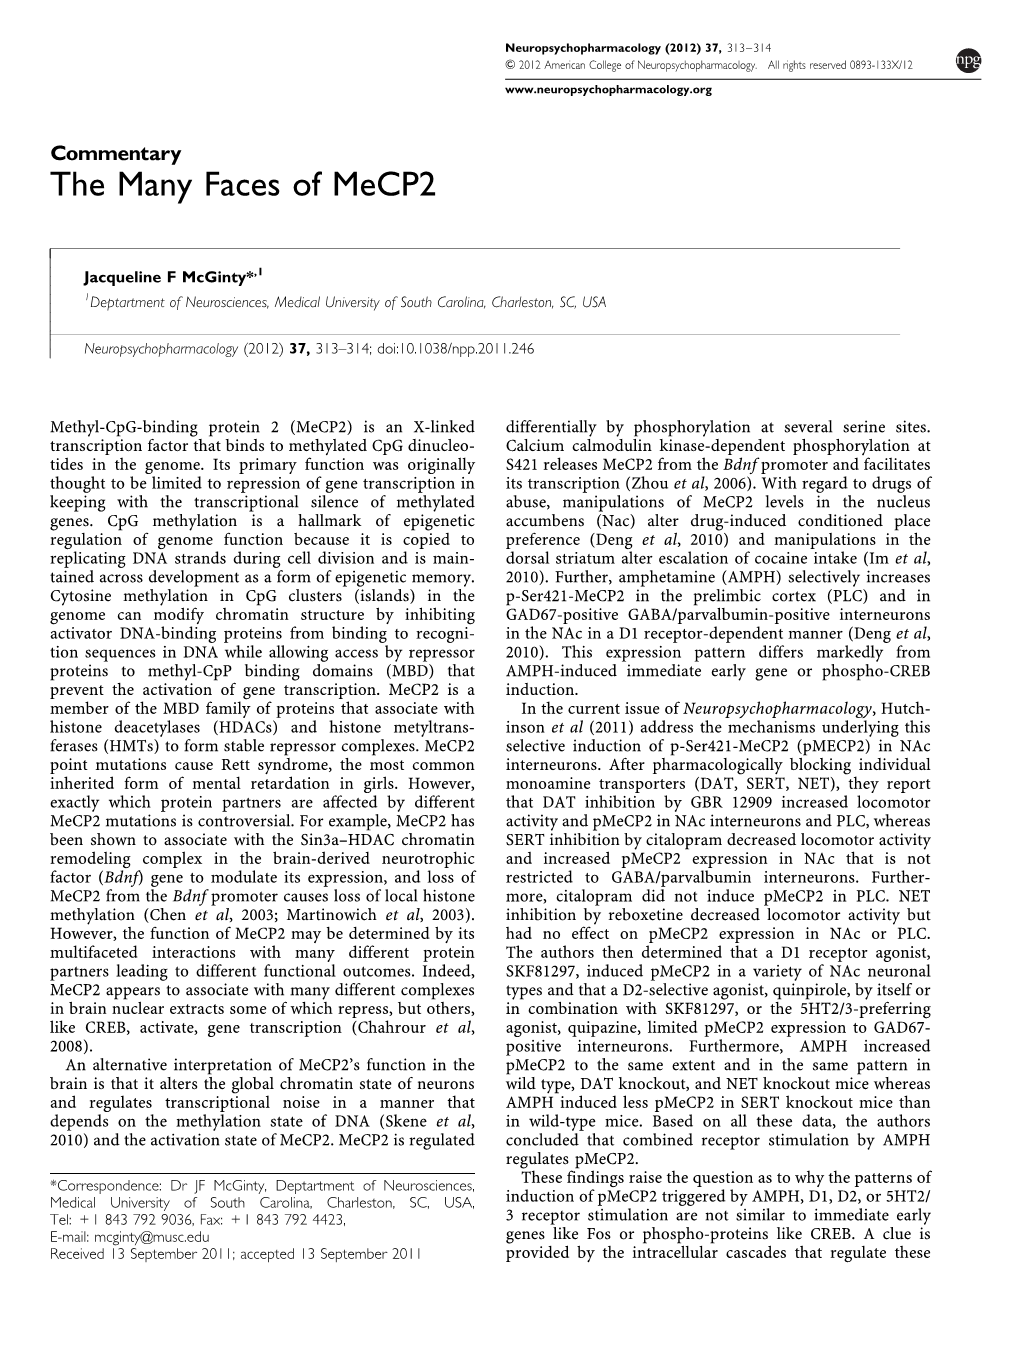 The Many Faces of Mecp2